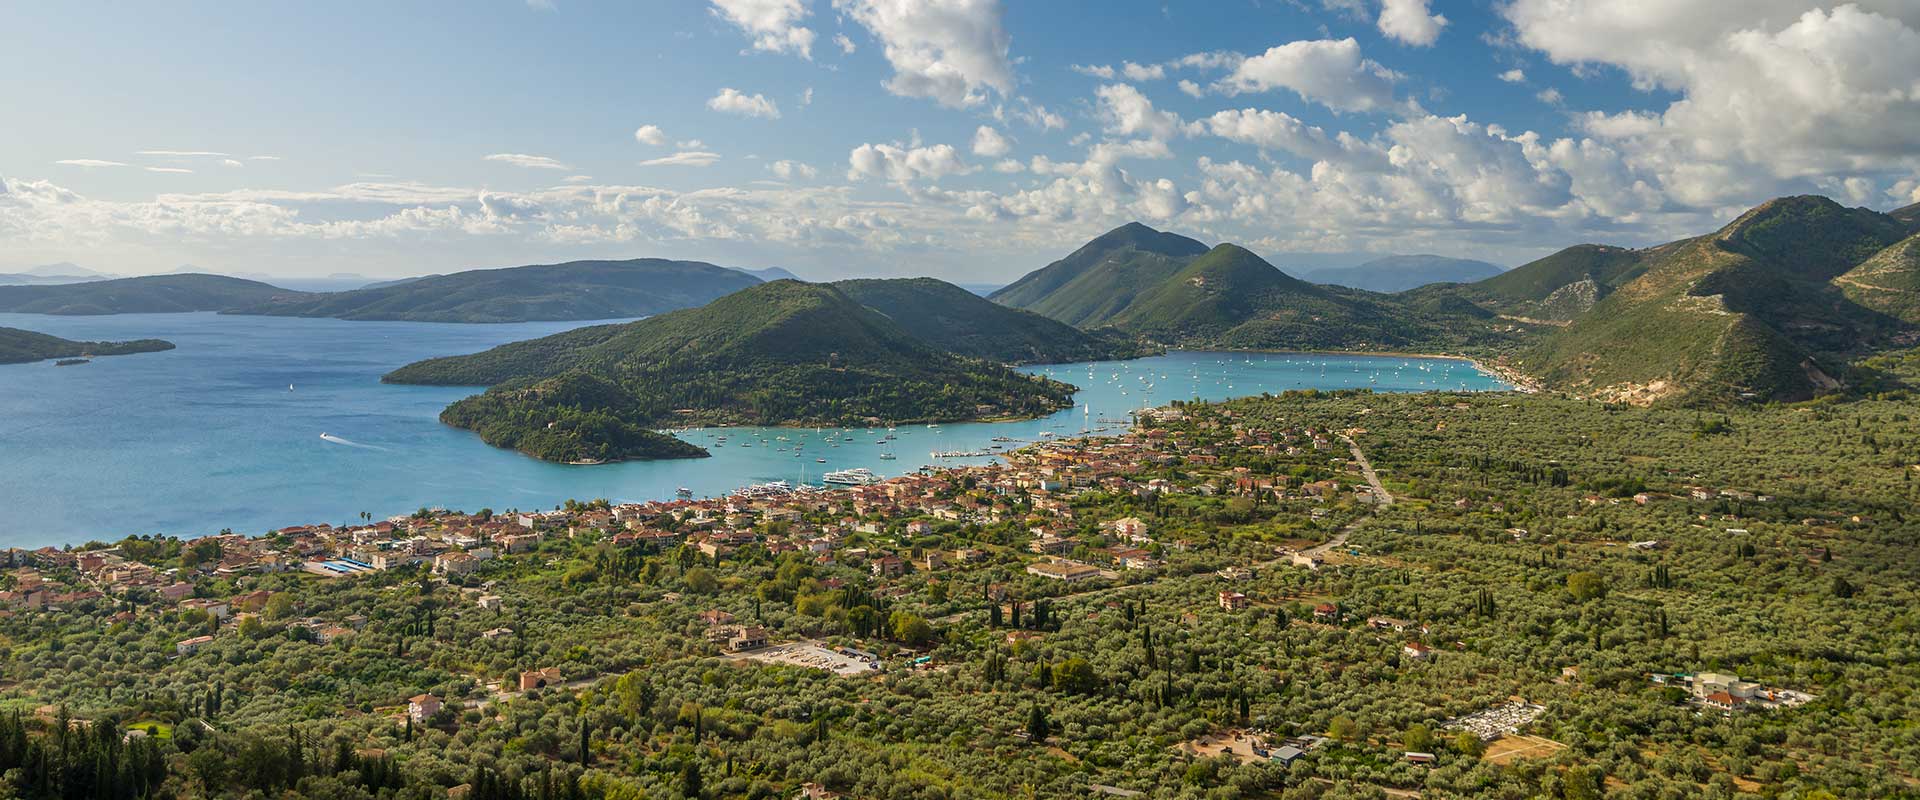 An aerial view captured by a drone showcasing the beautiful town of Nidri in Lefkada, Greece. The image highlights the picturesque landscape with lush greenery, crystal-clear turquoise waters, and charming buildings. In the foreground, there is a prominent sign reading 'Land for Sale in Nidri, Lefkada' indicating available property opportunities amidst this stunning location.